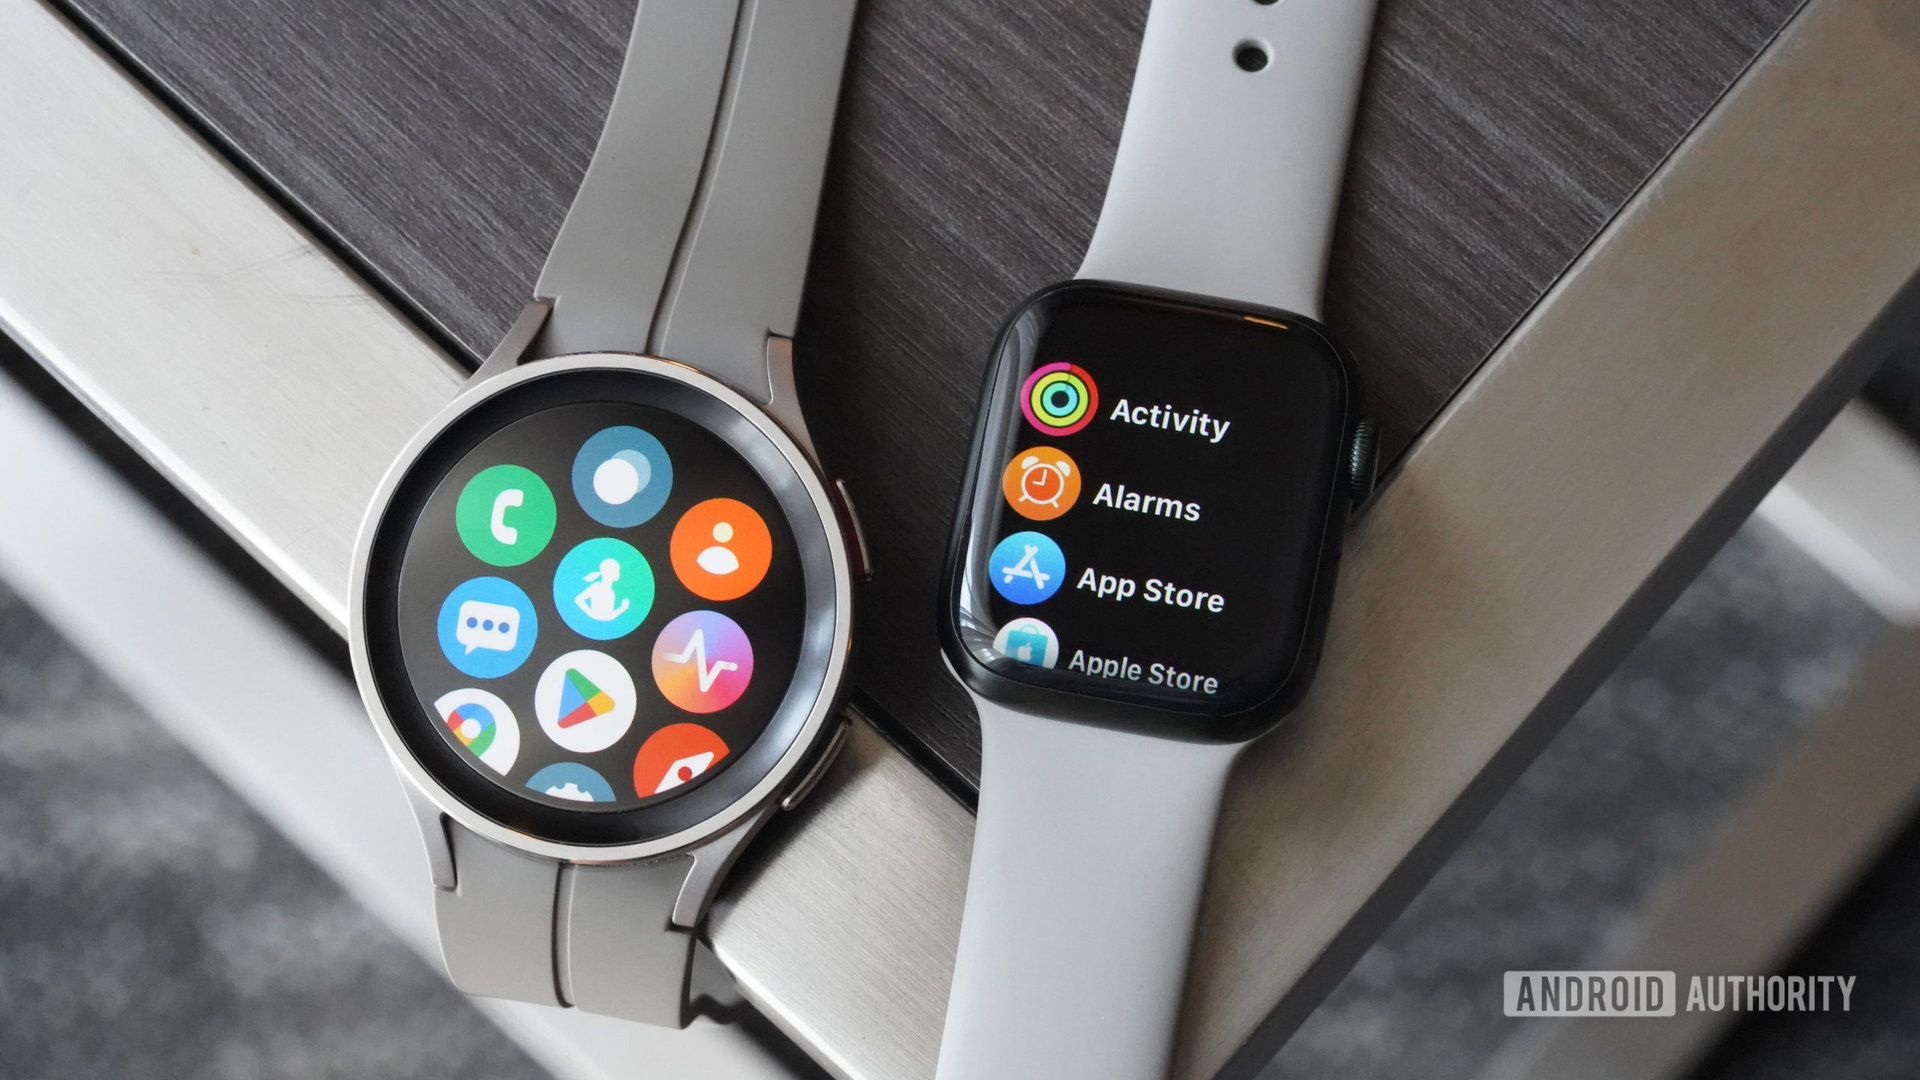 The Apple Watch can - Android Authority